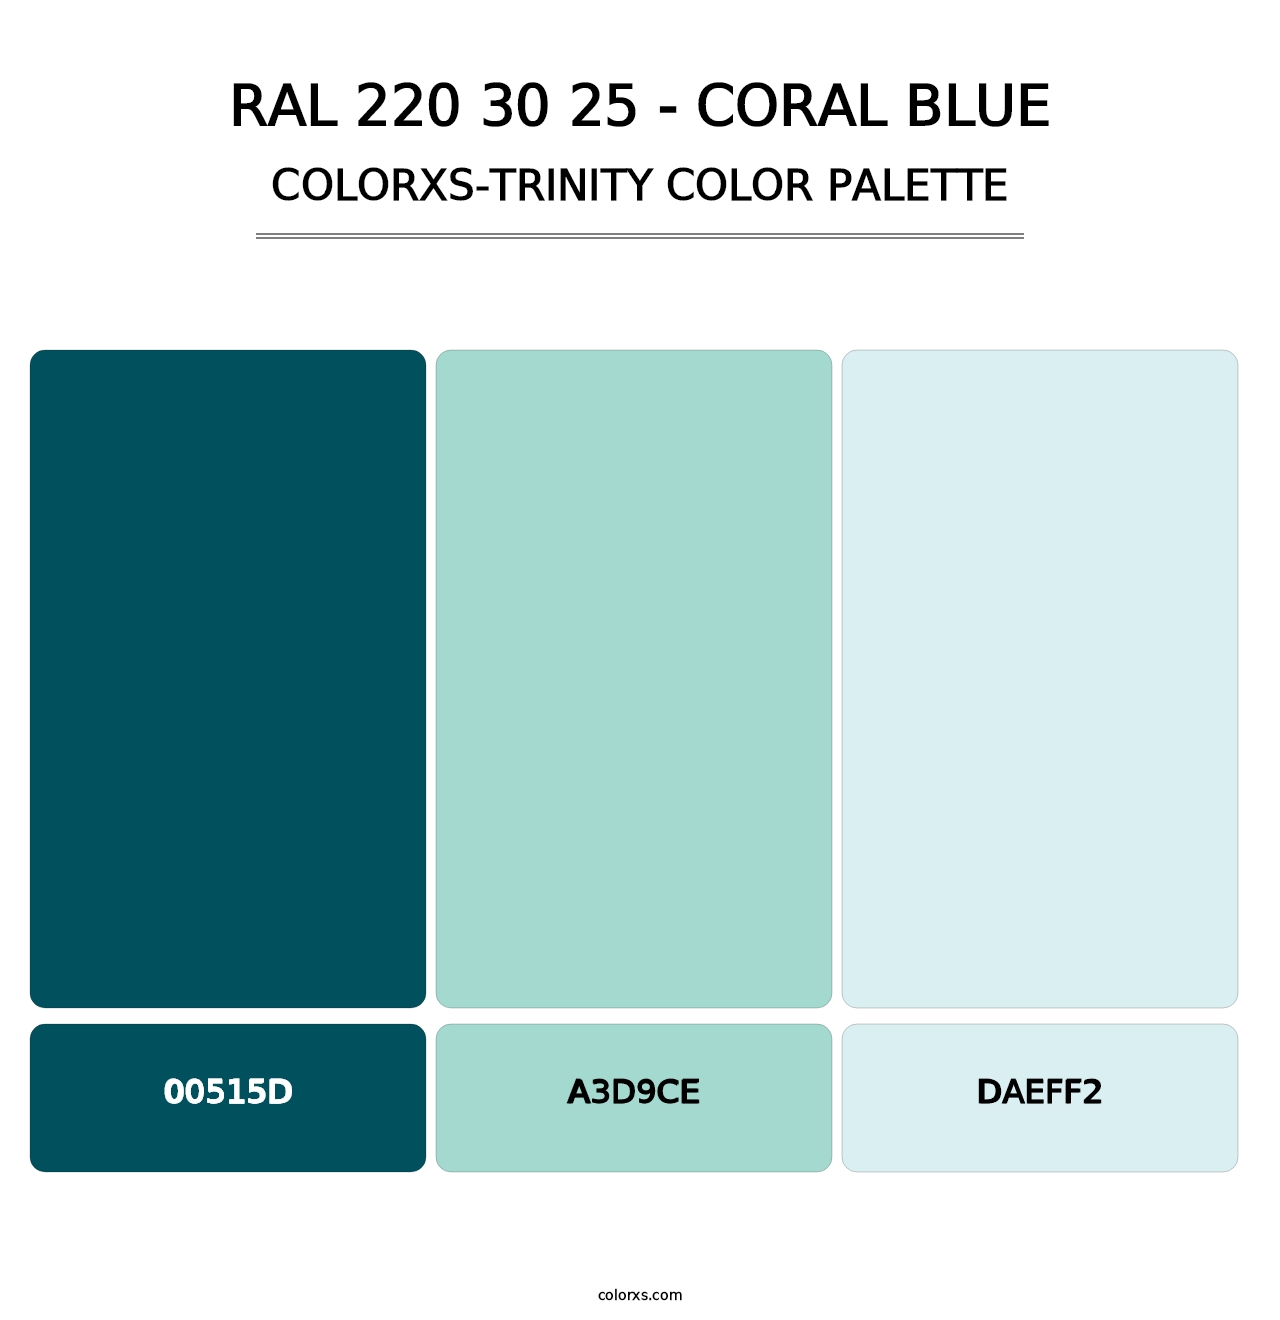 RAL 220 30 25 - Coral Blue - Colorxs Trinity Palette